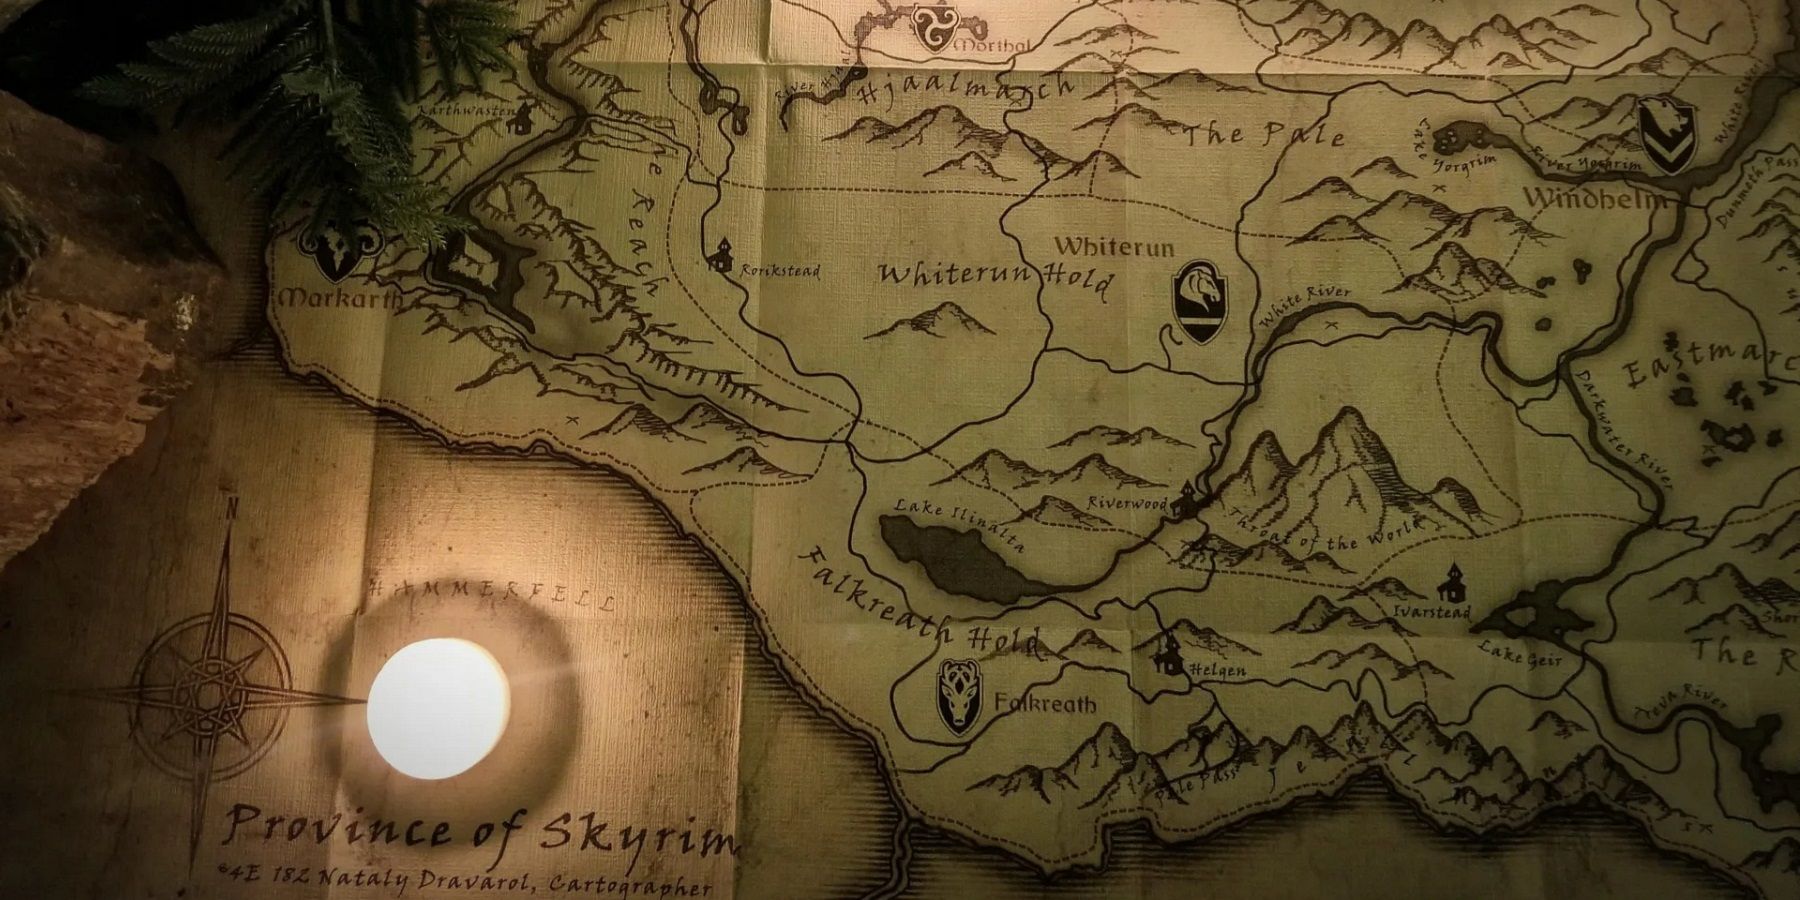 An Elder Scrolls map showing the province of Skyrim.